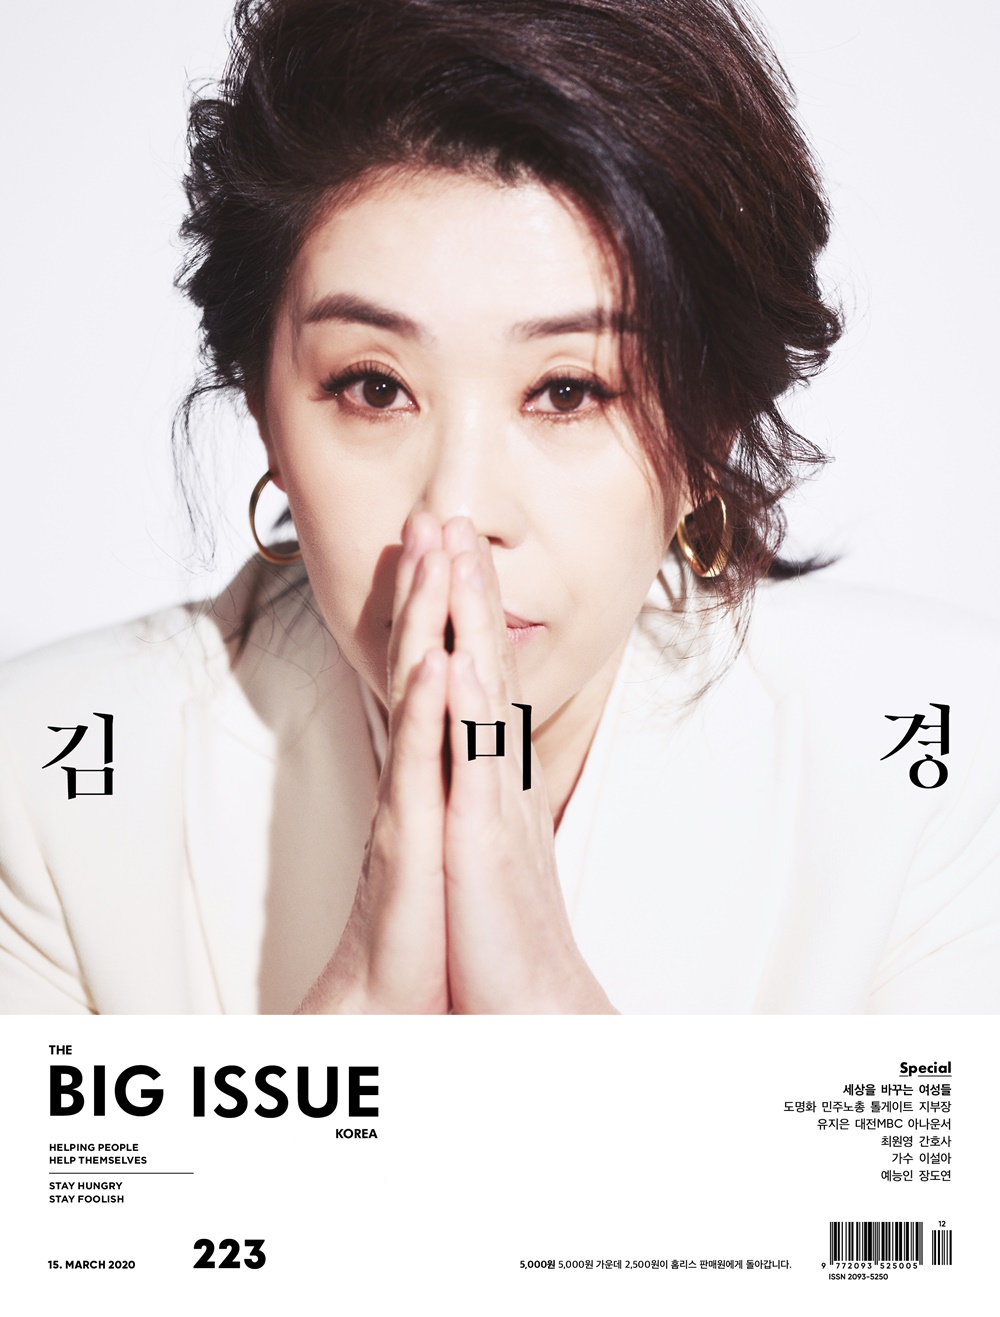 A special picture of Actor Kim Mi-kyung has been released.Magazine Big Issue selected the cover of issue 223 as a picture of Actor Kim Mi-kyung in commemoration of World Womens Day on March 8.Kim Mi-kyung, who has been active in drama, film, and play stage, has frequently appeared as a woman who pioneered professional fields such as blacksmiths, nurses, and sea ladies in her works.In the Play Han Cryptology, he showed 13 roles per person. In the movie 82, Kim Ji Young appeared as Ji Youngs mother immature and made a deep impression on many people.Kim Mi-kyung, who has shown the life and appearance of Korean women through various works, photographed the picture for World Womens Day and radiated his own image, not anyones mother.Kim Mi-kyung showed off his wonderful charisma by digesting 100% of the proud and wonderful concept of this picture.Kim Mi-kyung, who wants to show real, humanistic act, is in this interview with TVN drama Hibye, Mama!Kim Mi-kyung also confided in her concerns about the genus Acting, saying she trying to come true to the heart of her mother who lost her child.Also, for the second time, Kim Tae-hee, who plays a daughter who is breathing together, praised him as very brave actor.Kim Mi-kyung expressed his desire to take on the role of a proper villain, saying, I think it is close to the hacker of the drama Healer or the character of Taewang Sasingi Basson.Kim Mi-kyung also expressed confidence that he could play any role regardless of age.Kim Mi-kyung, who is a 35-year-old Actor but increasingly difficult to act every day, said, It is most important to show your sincerity in Acting.Kim Mi-kyungs interviews with the pictorials can be found in Big Issue 233.Photo: Big Issue